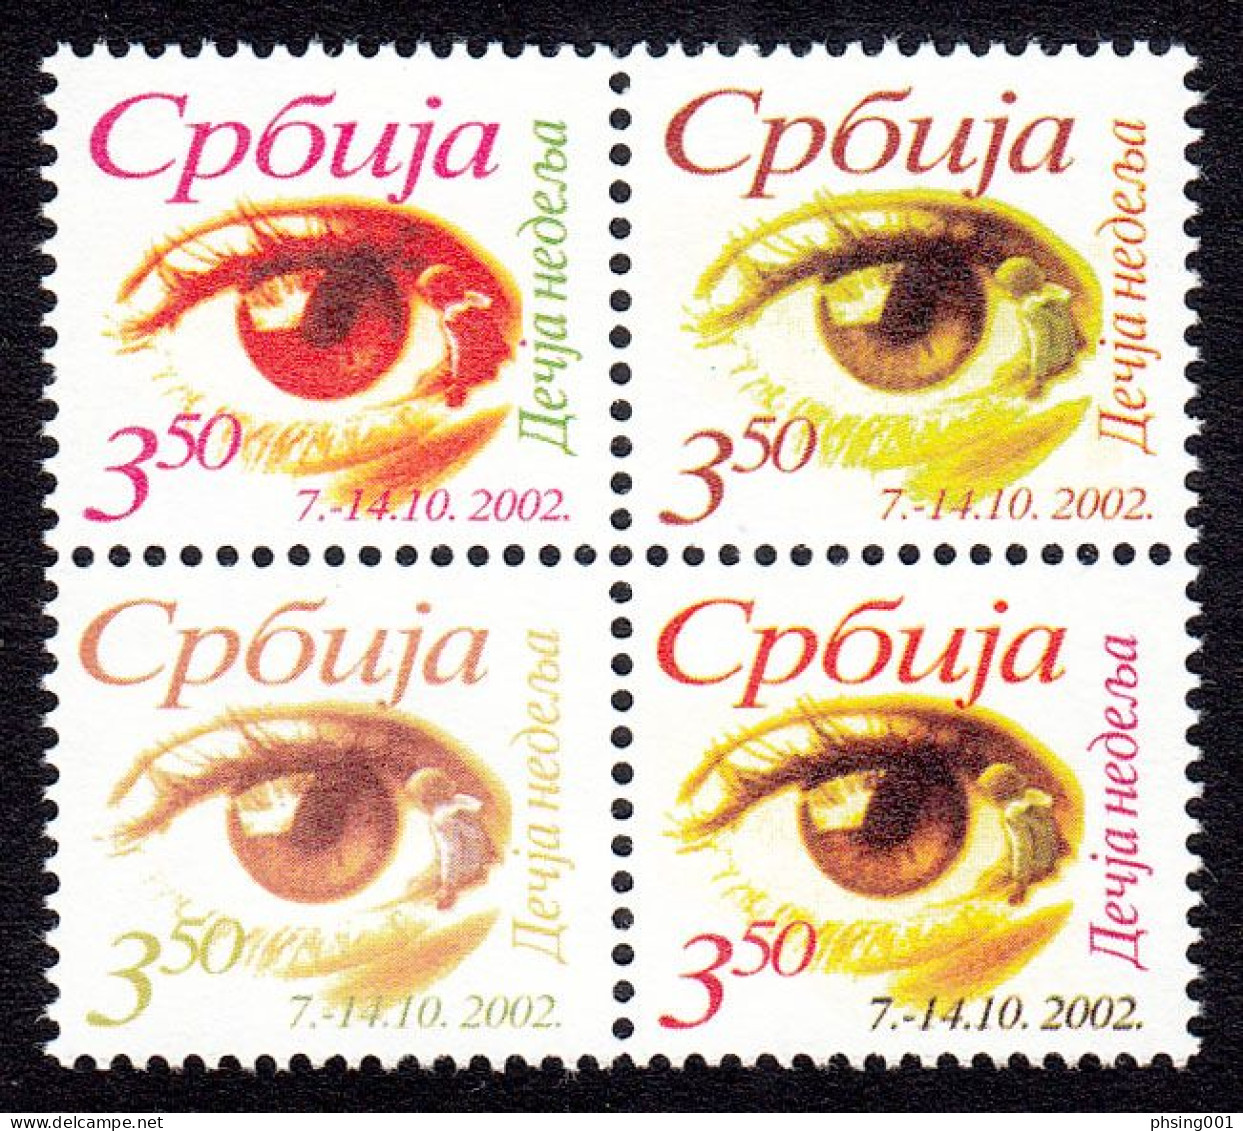 Yugoslavia Serbia 2002 Children's Week Eyes Tax Charity Surcharge, 25, 26, 35 And 36 Position In Sheet In Block Of 4 MNH - Unused Stamps